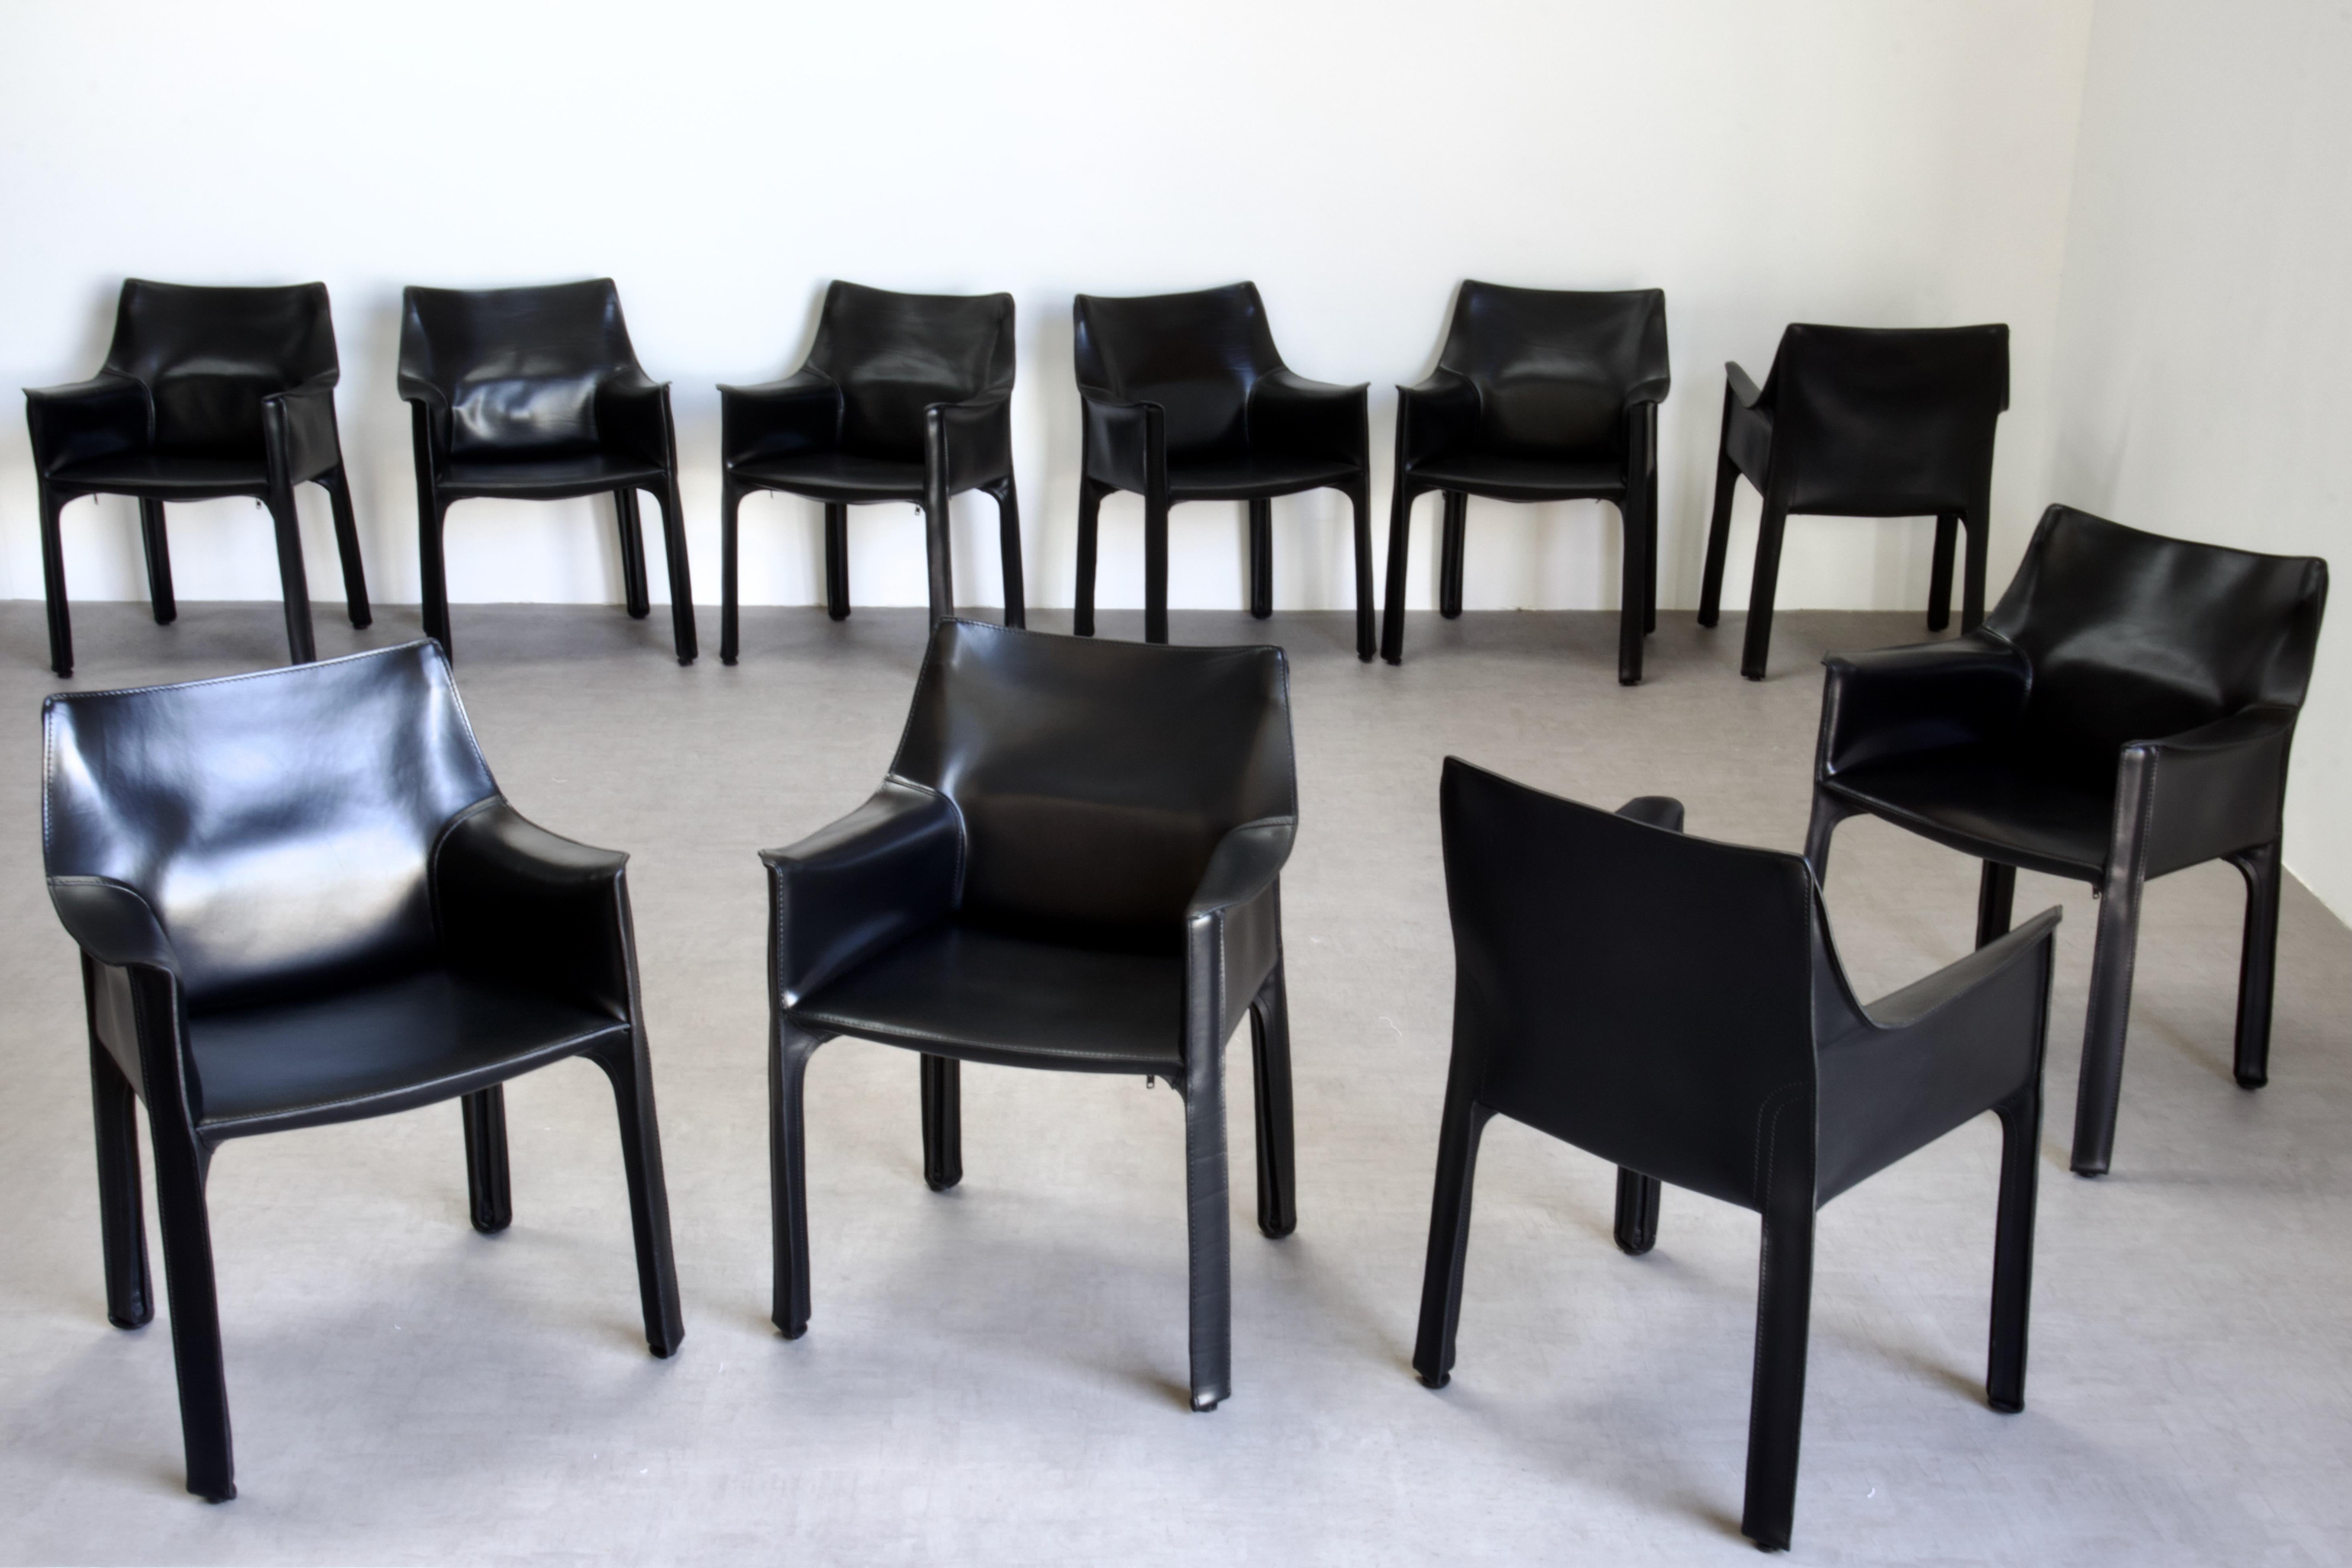 Set of 8 Mario Bellini CAB 413 chairs, made by Cassina. Flexible steel frame covered with a skin of high quality vintage black saddle leather. 

The chairs, which were already in very good condition, have been thoroughly refreshed by our atelier and